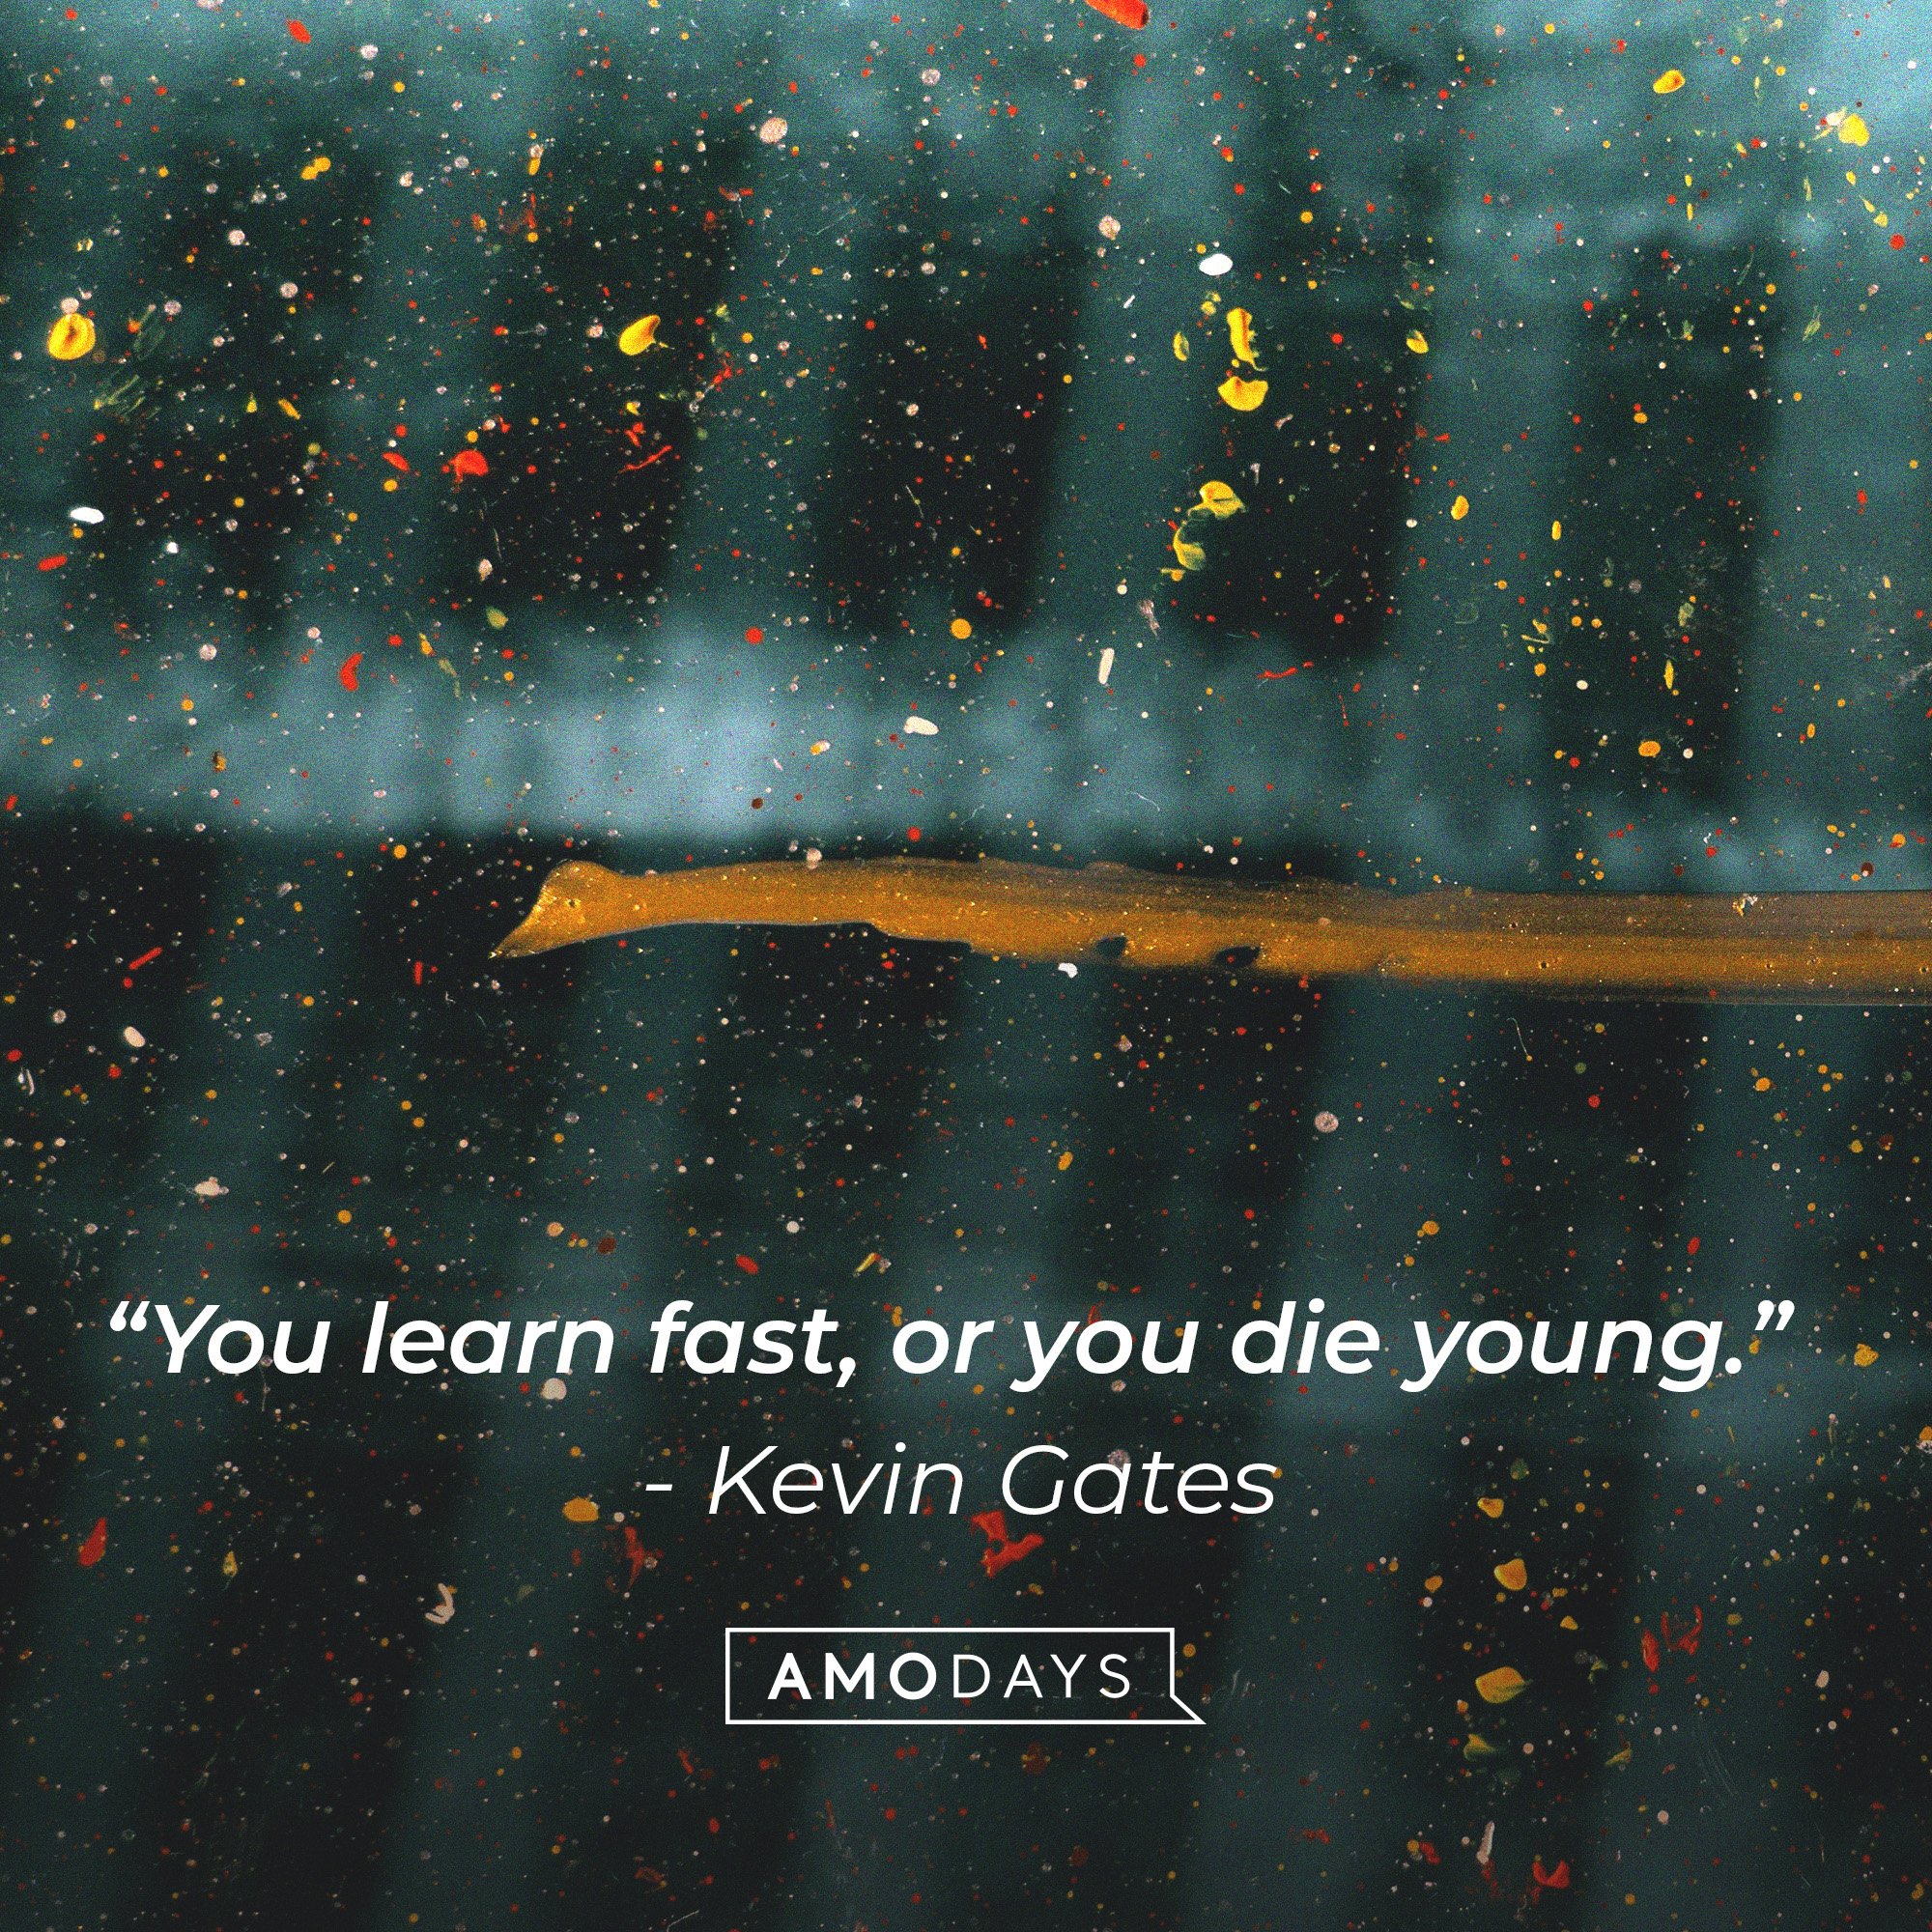 Kevin Gates’ quote: “You learn fast, or you die young.” | Image: AmoDays